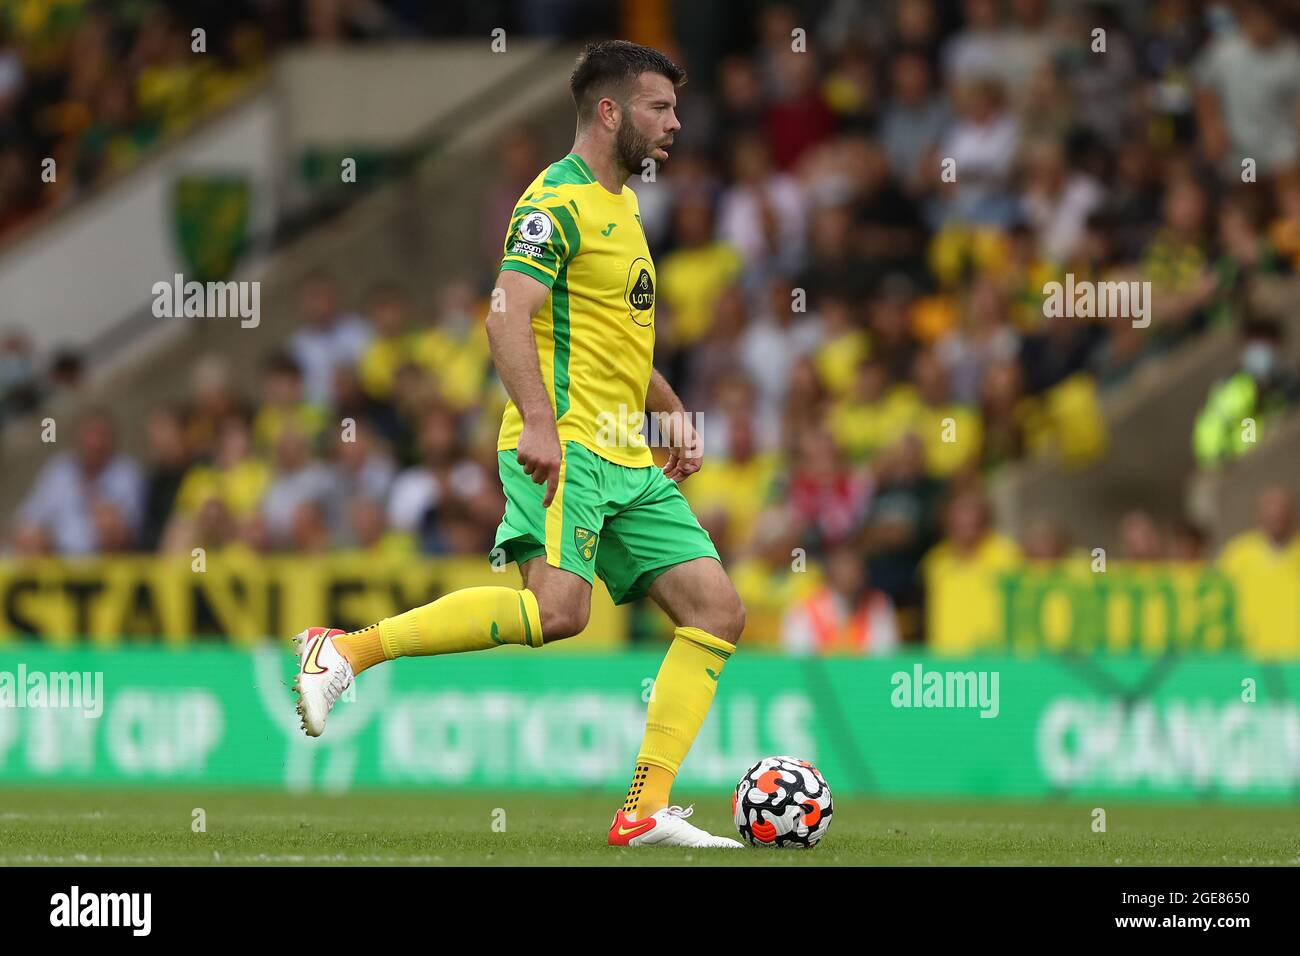 Grant Hanley of Norwich City - Norwich City v Liverpool, Premier League, Carrow Road, Norwich, UK - 14th August 2021  Editorial Use Only - DataCo restrictions apply Stock Photo